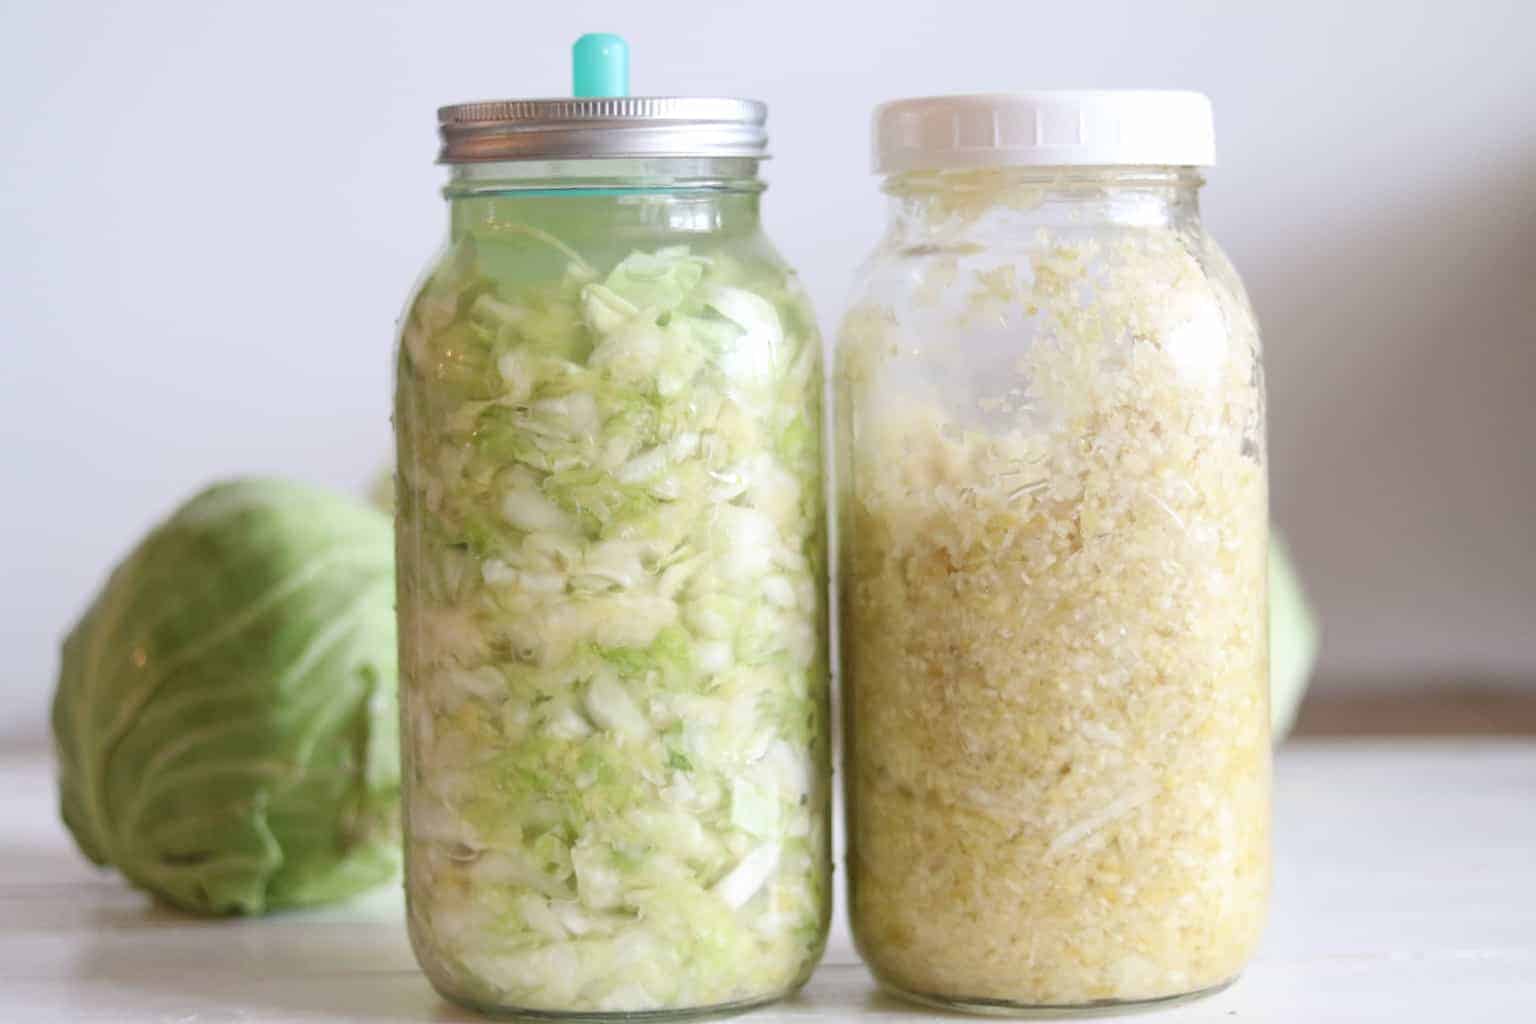 Two jars of sauerkraut sitting on white table with cabbage in background.